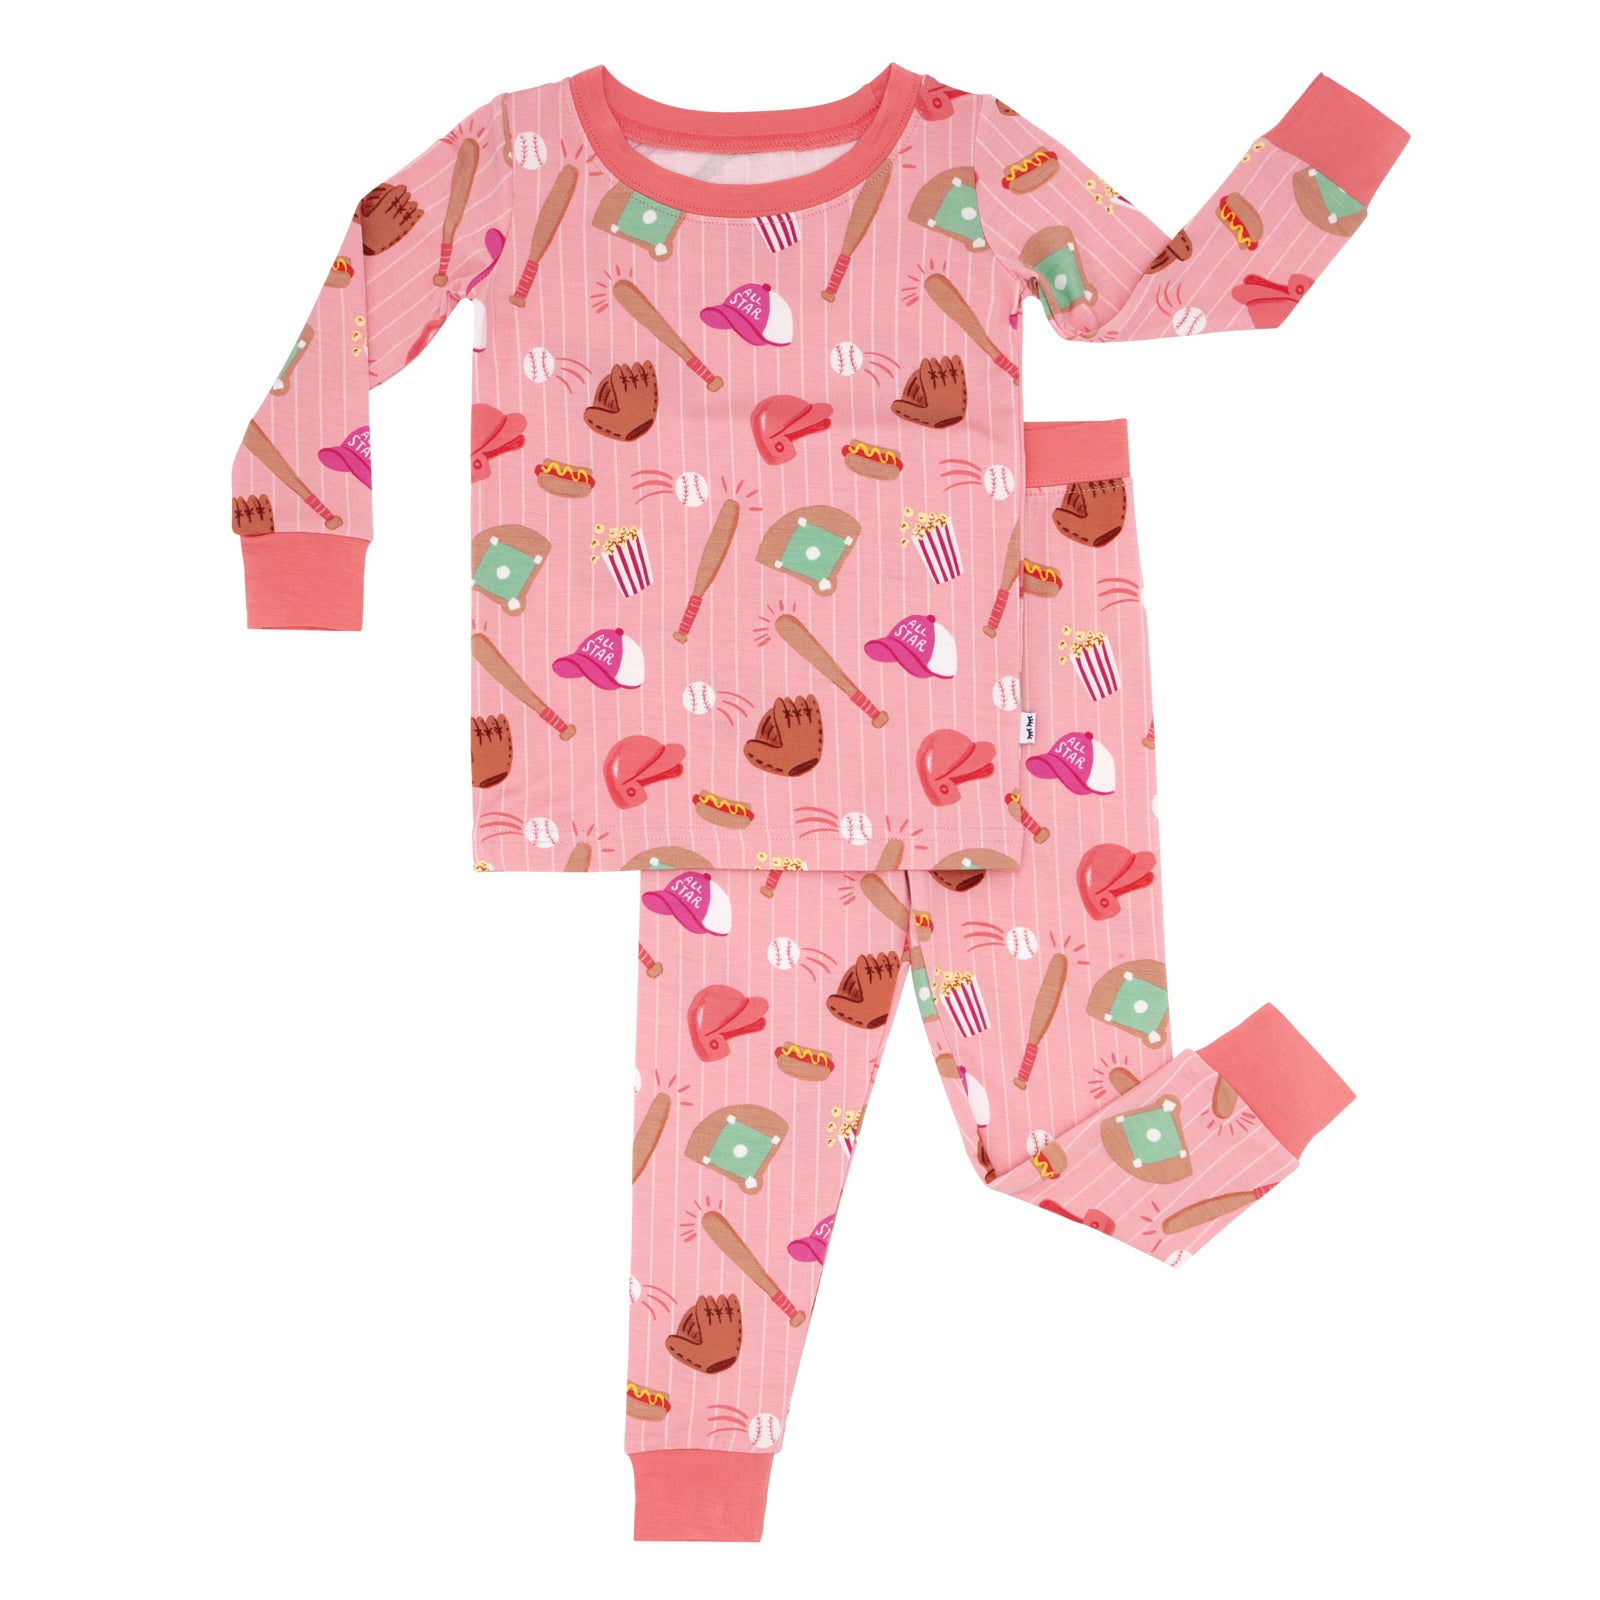 Flat lay image of a Pink All Stars printed two piece pajama set